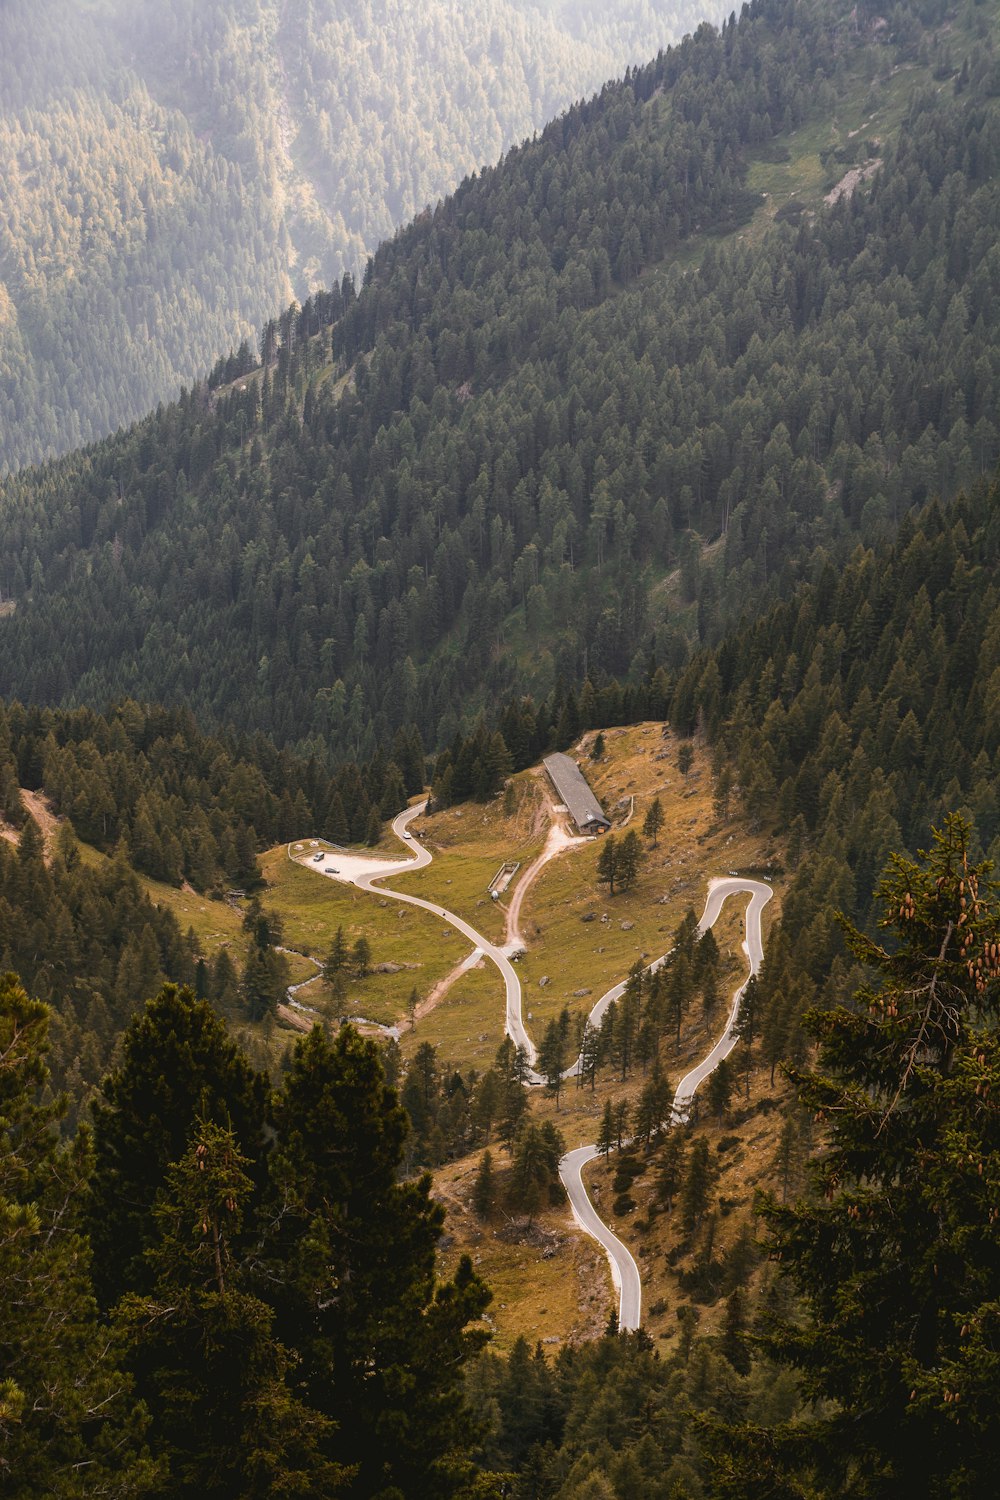 A zigzagging road surrounded by evergreen woods on a hillside in Manghen Pass